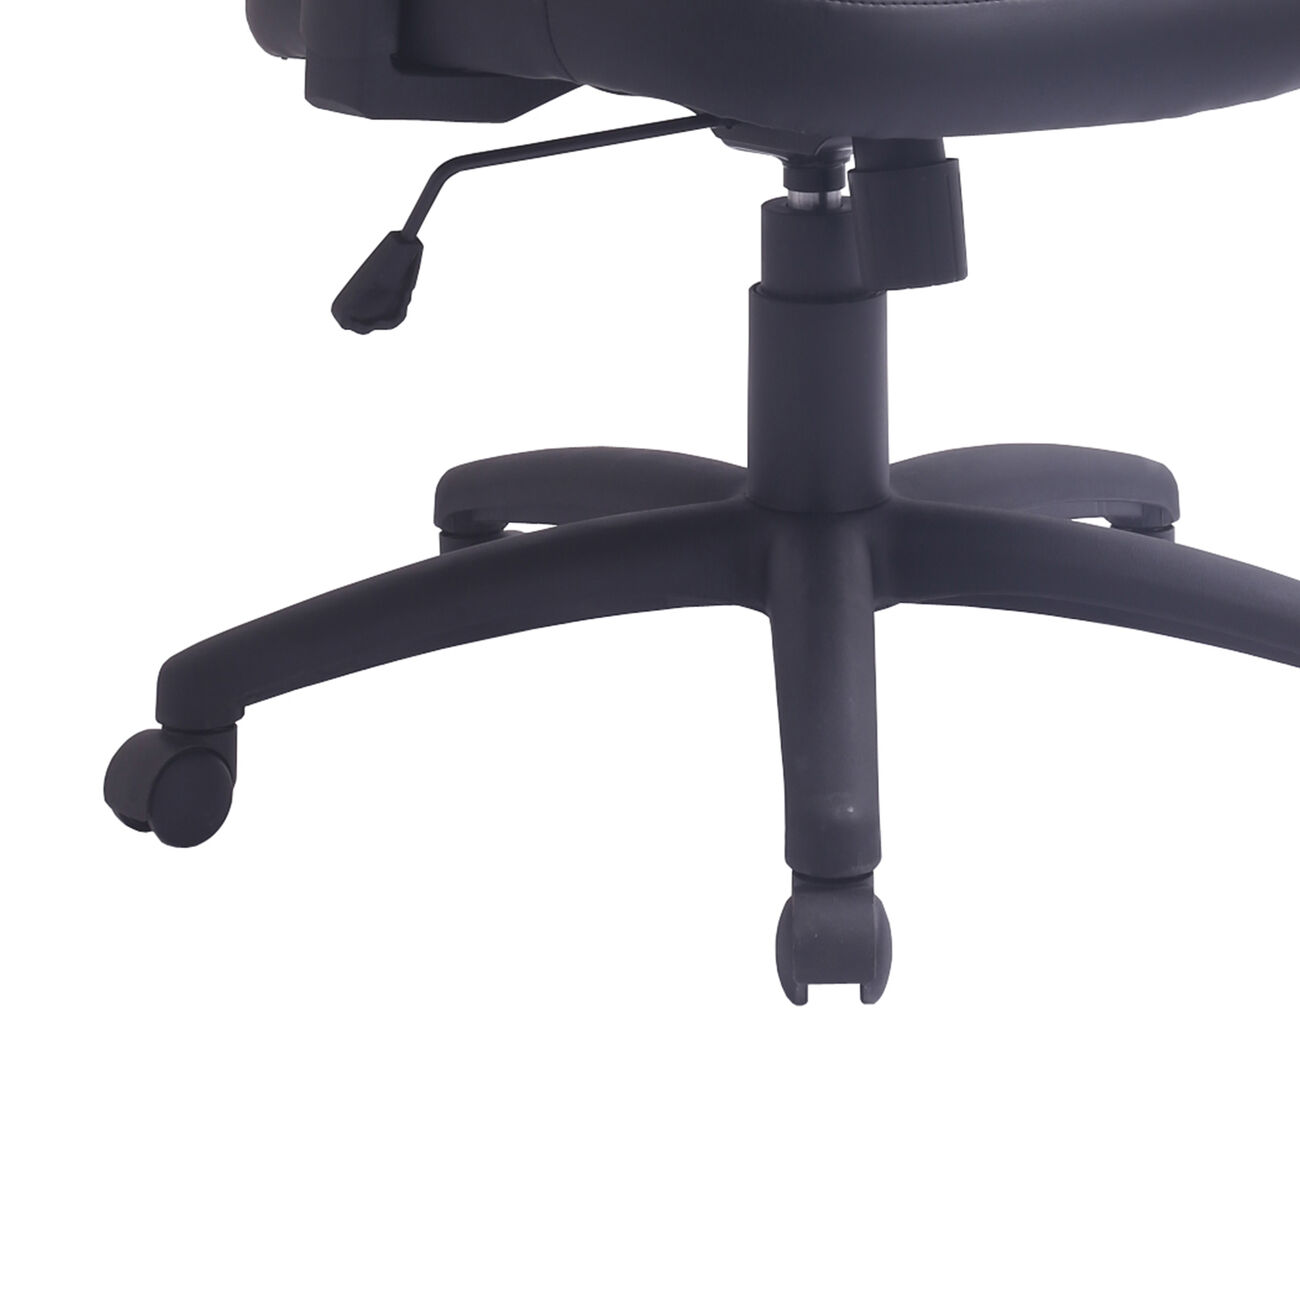 Leatherette Upholstered Swivel Office Chair with Track Armrests, Black